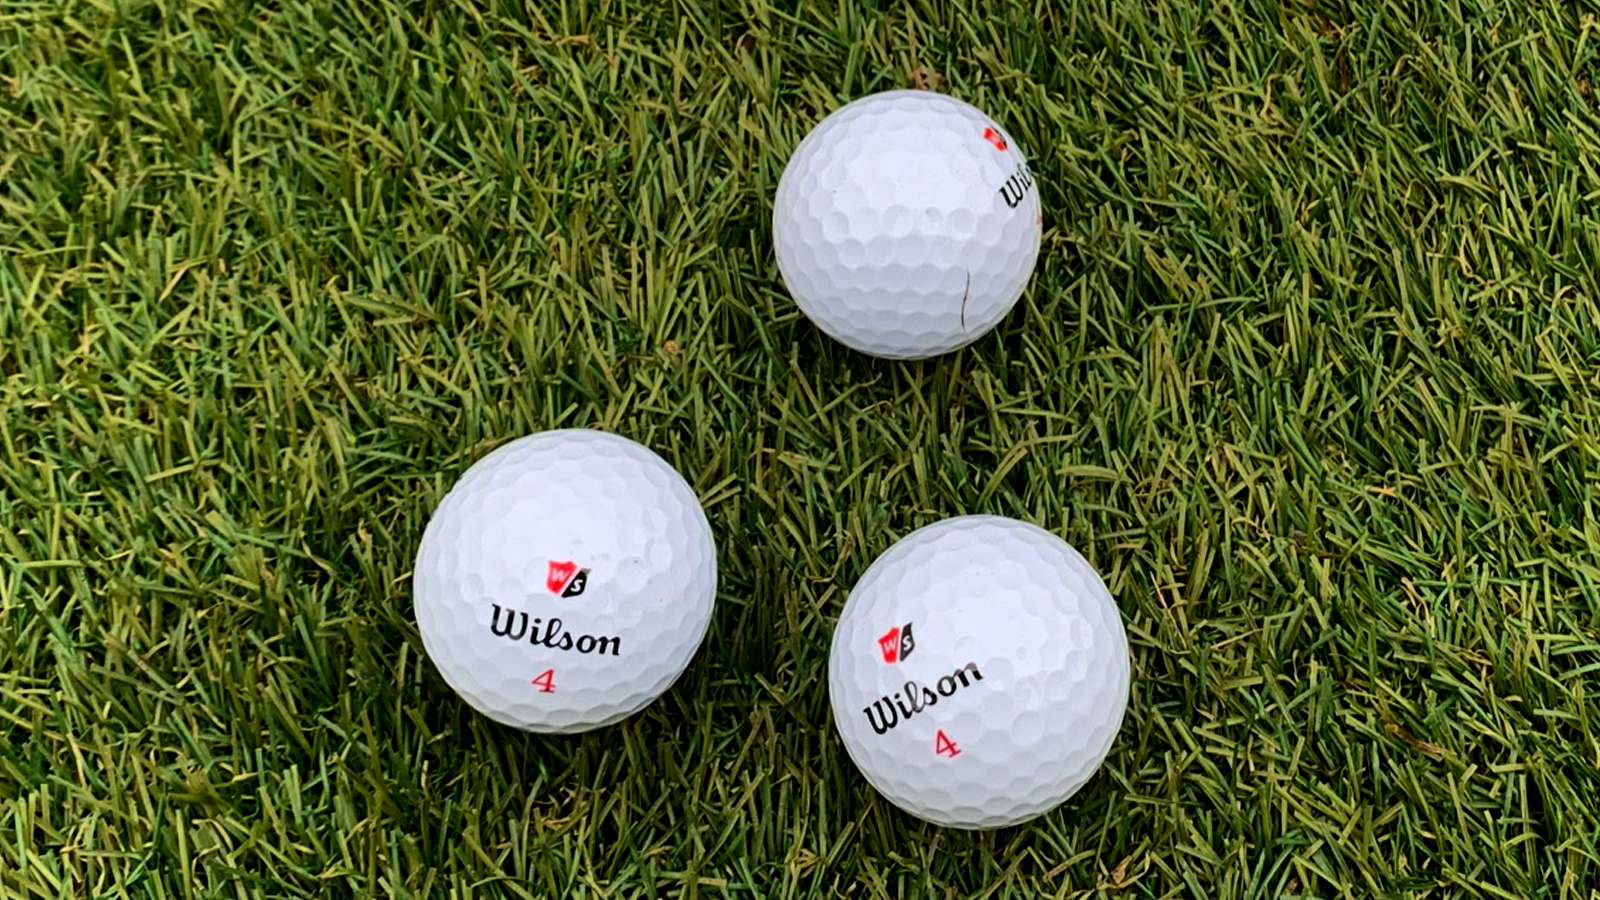 Wilson Duo Soft 2023 Golf Ball Review | Golf Monthly